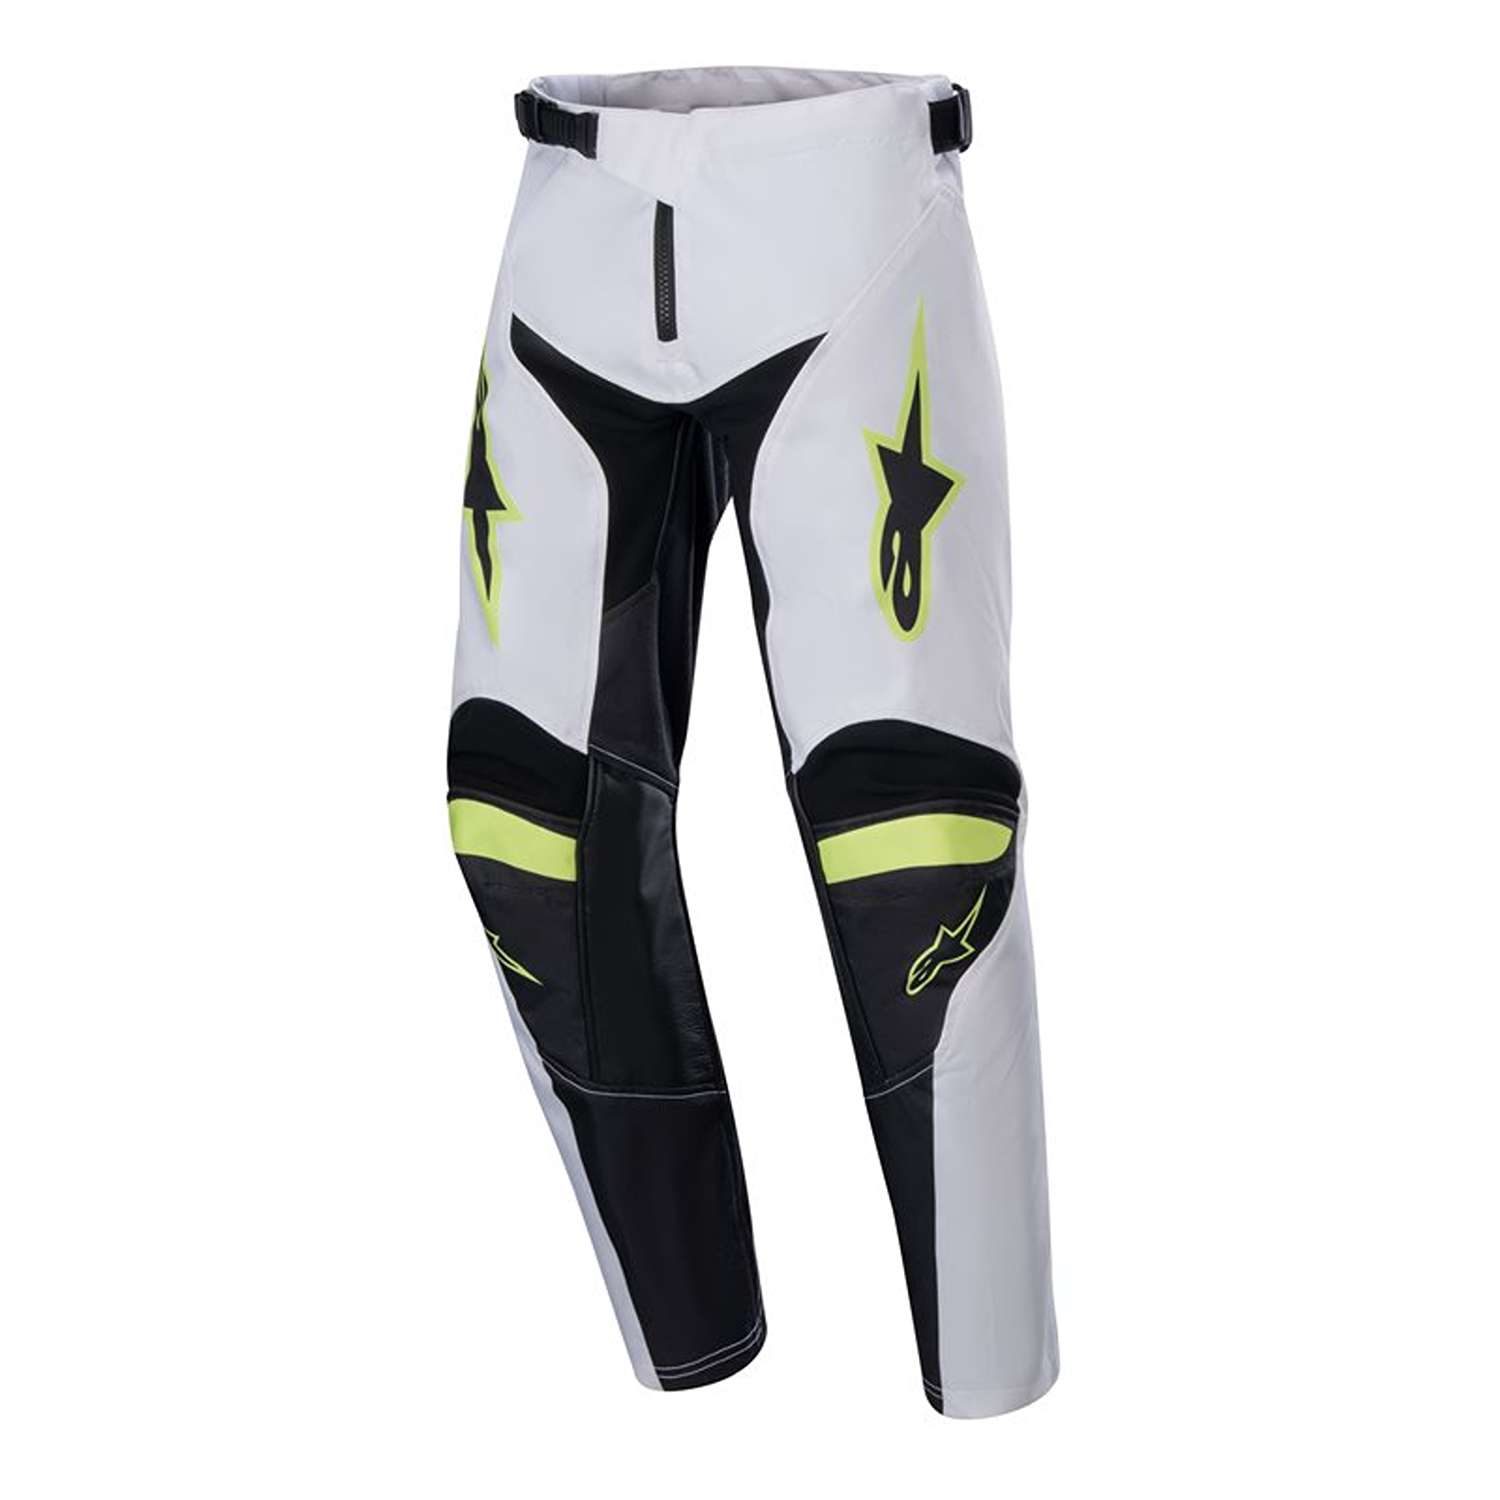 Image of Alpinestars Youth Racer Lucent Pants White Neon Red Yellow Fluo Size 22 ID 8059347267463